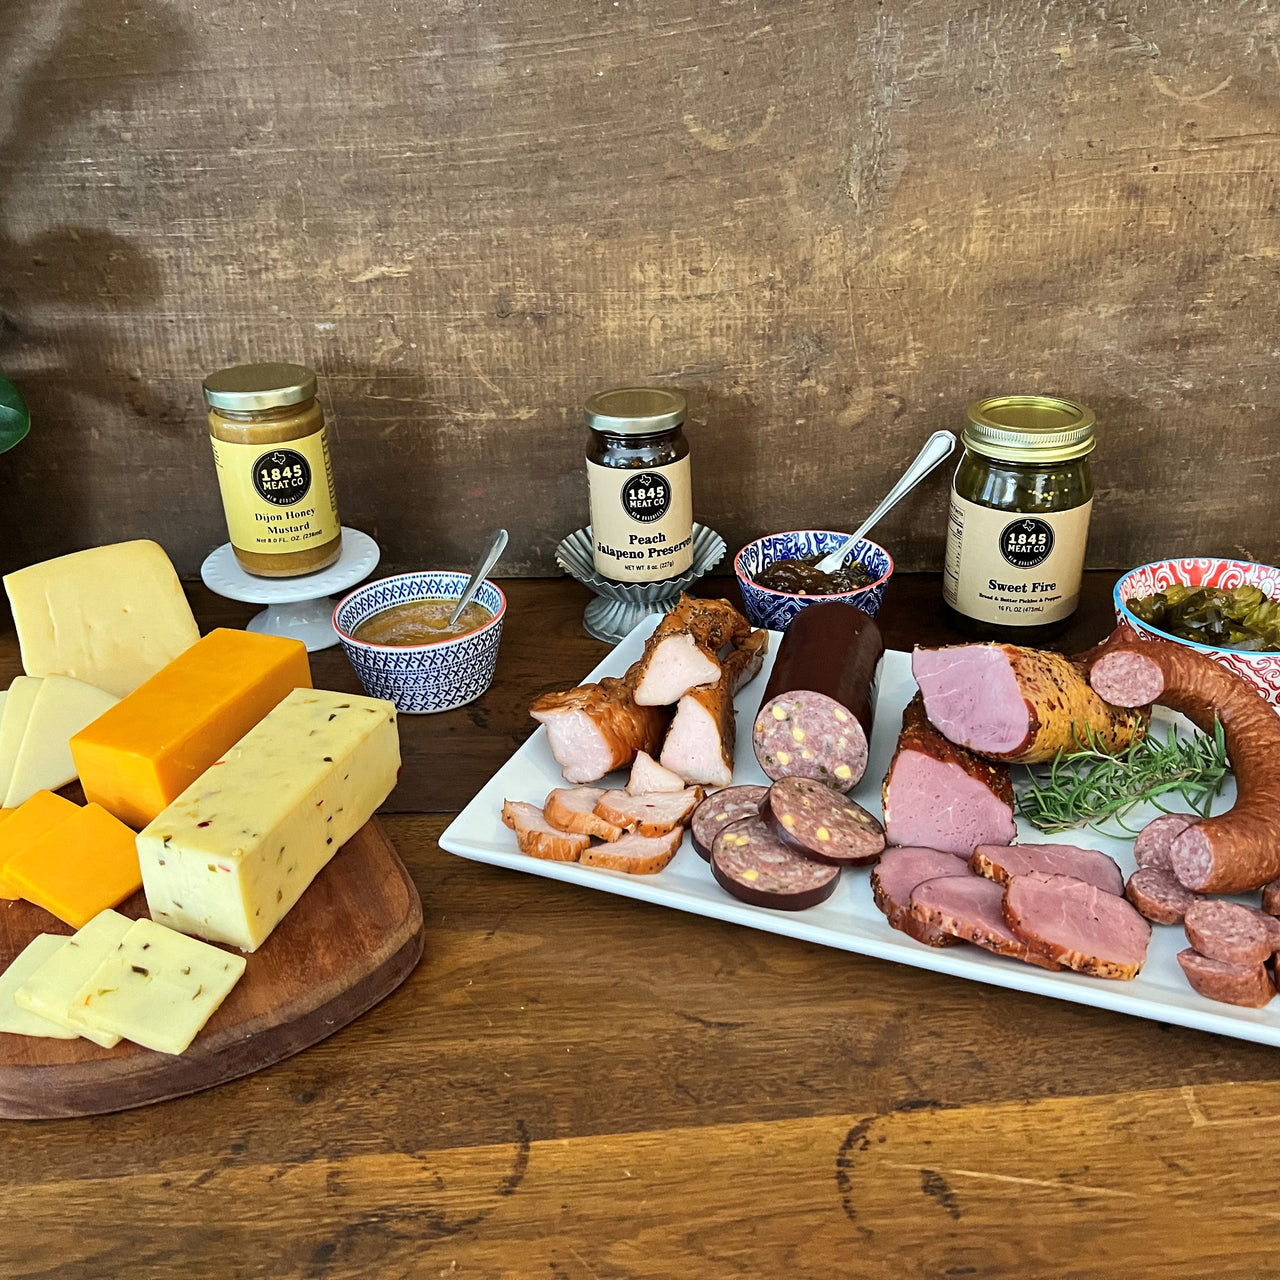 This assortment is a collection of some of our favorites.  Includes:  12 oz. of Smoked Turkey Breast Filet 16 oz. of Pork Tenderloin 12 oz. Cheddar Jalapeno Summer Sausage 8 oz. Dietert Family Pork & Beef Ring Sausage 16 oz. Jar of Sweet Fire Pickles 8 oz. Jar of Peach Jalapeno Preserves 8 oz. Jar of Honey Dijon Mustard 8 oz. Smoked Cheddar Cheese 8 oz. Smoked Pepper Jack Cheese 10 oz. Smoked Baby Swiss Cheese ﻿Item #30E A great addition to this assortment would be to add our German Mustard.